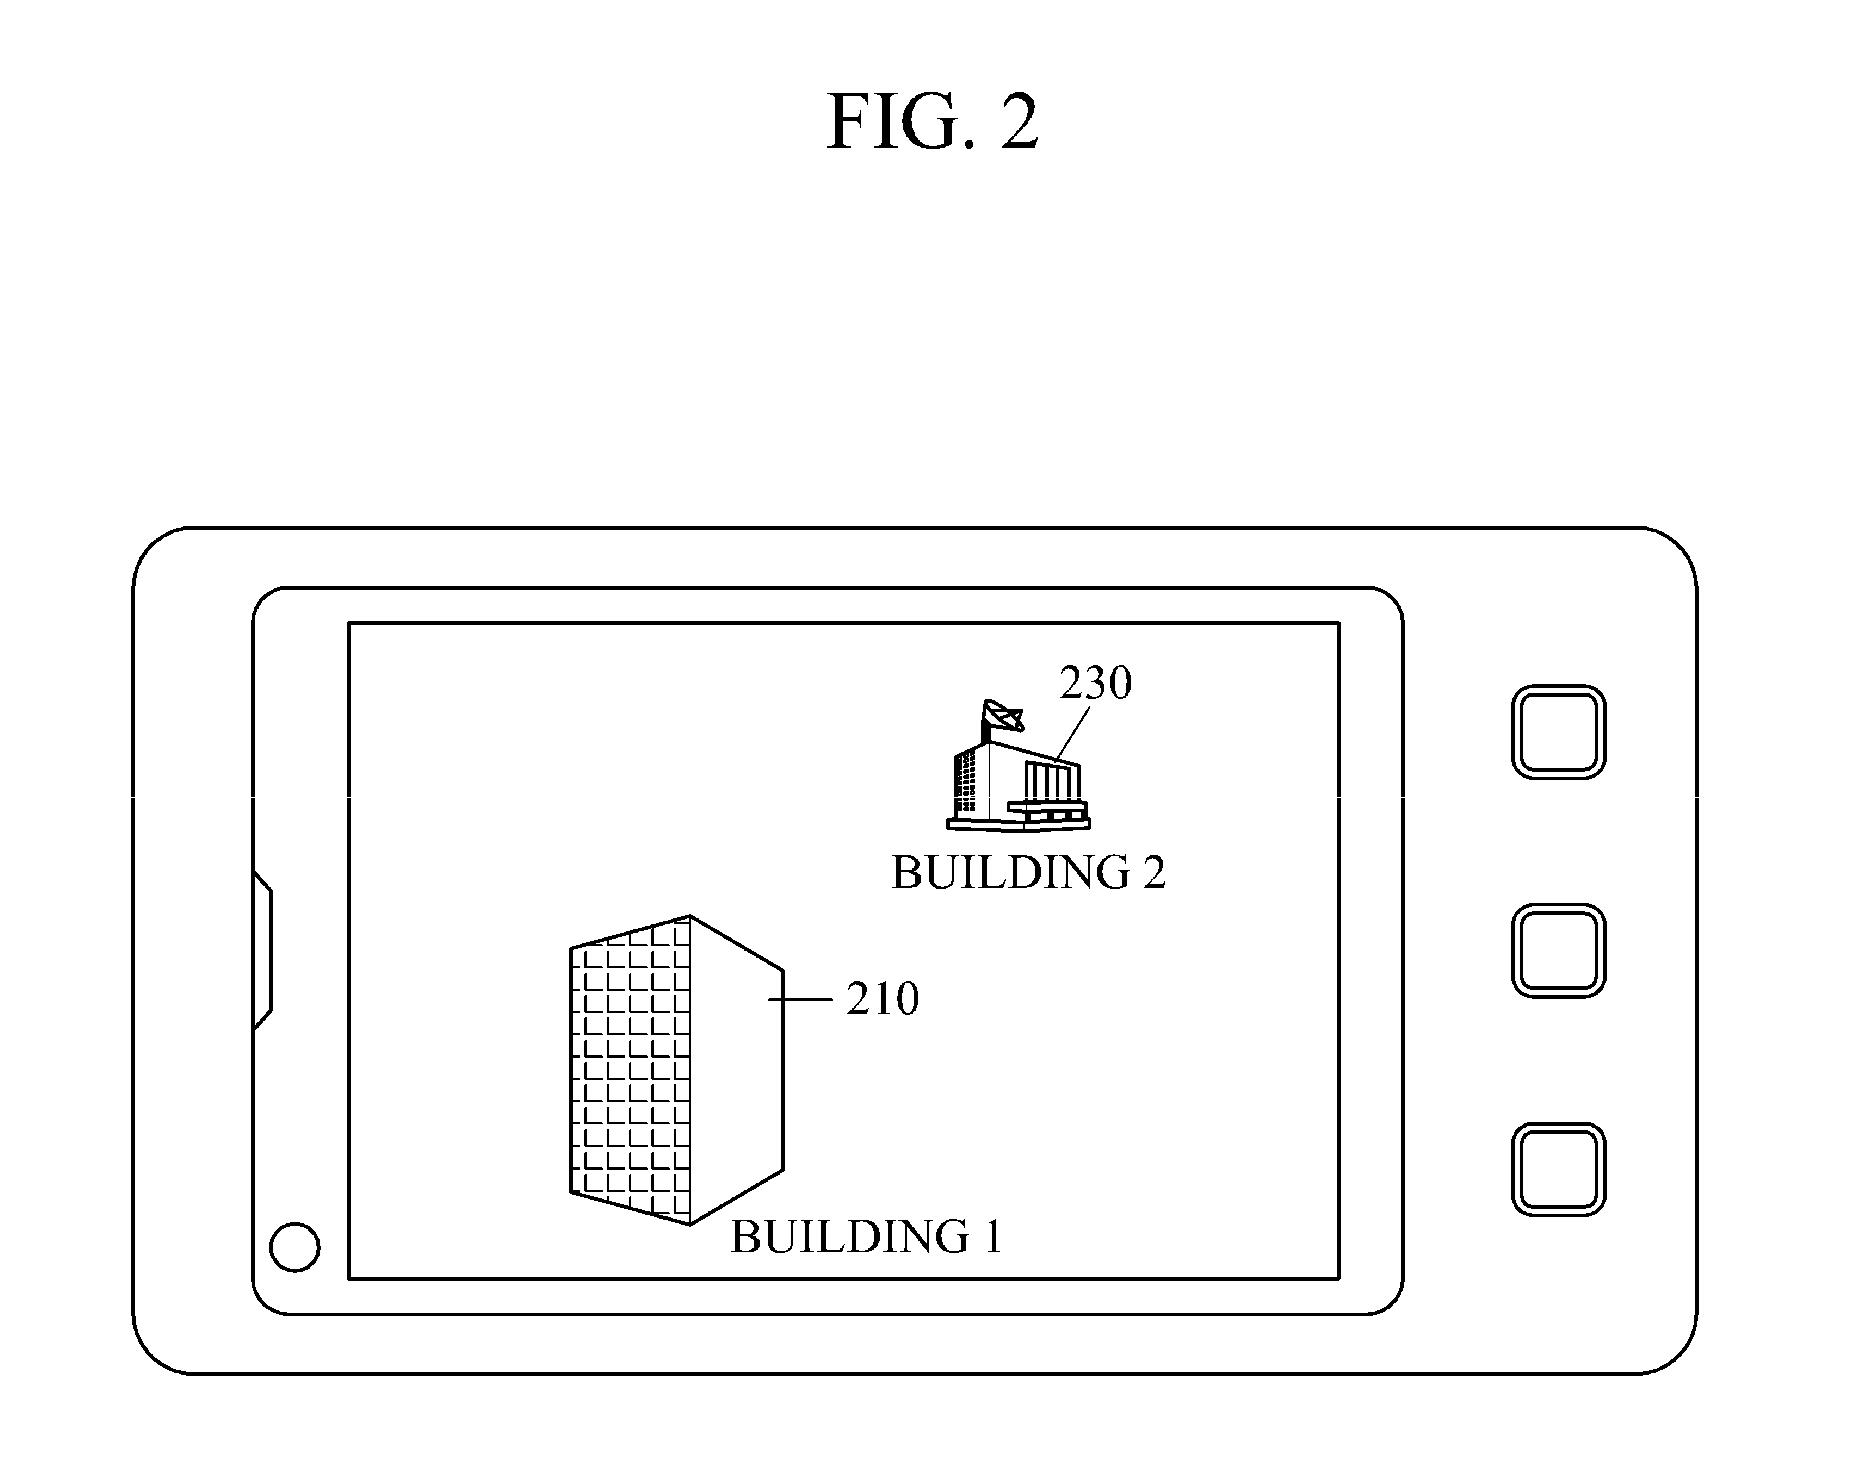 Apparatus and method for providing object information